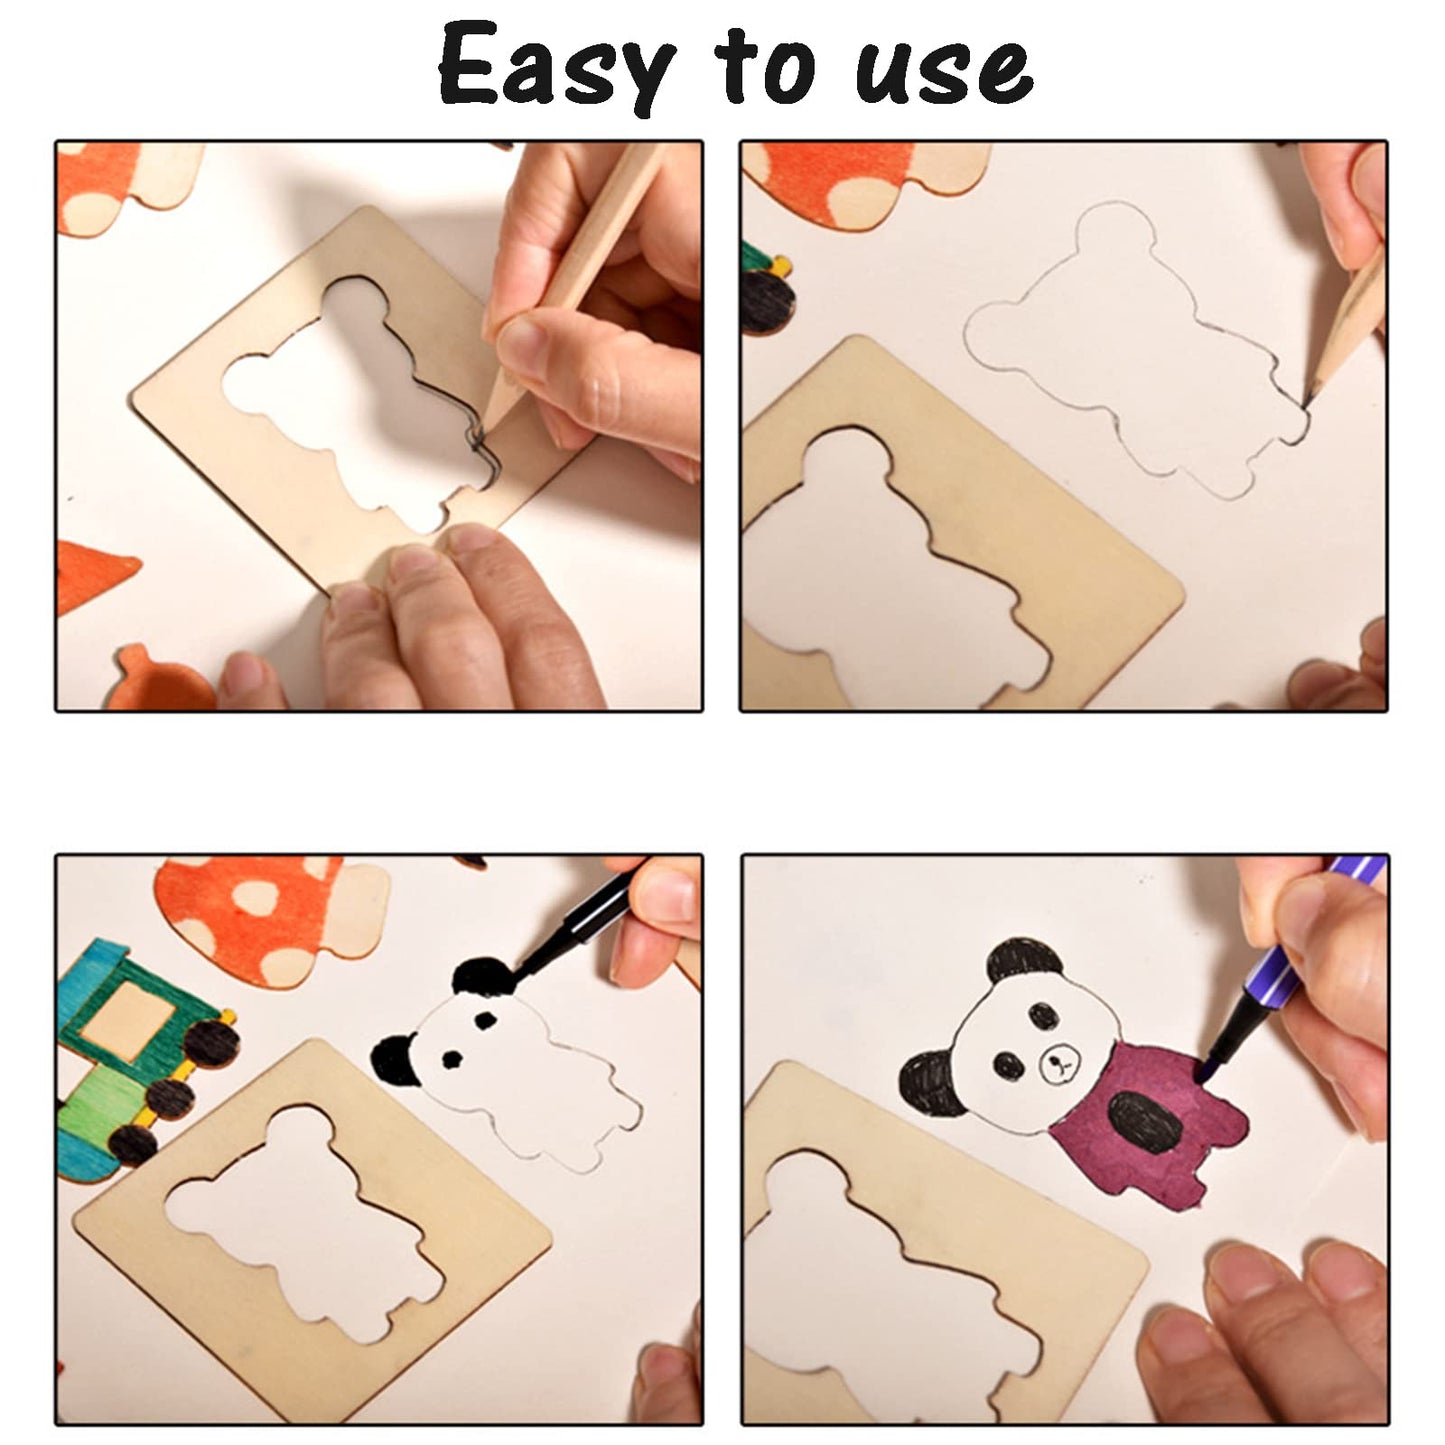 DIY Wooden Stencils Drawing Kit For Kids – 12 Pieces